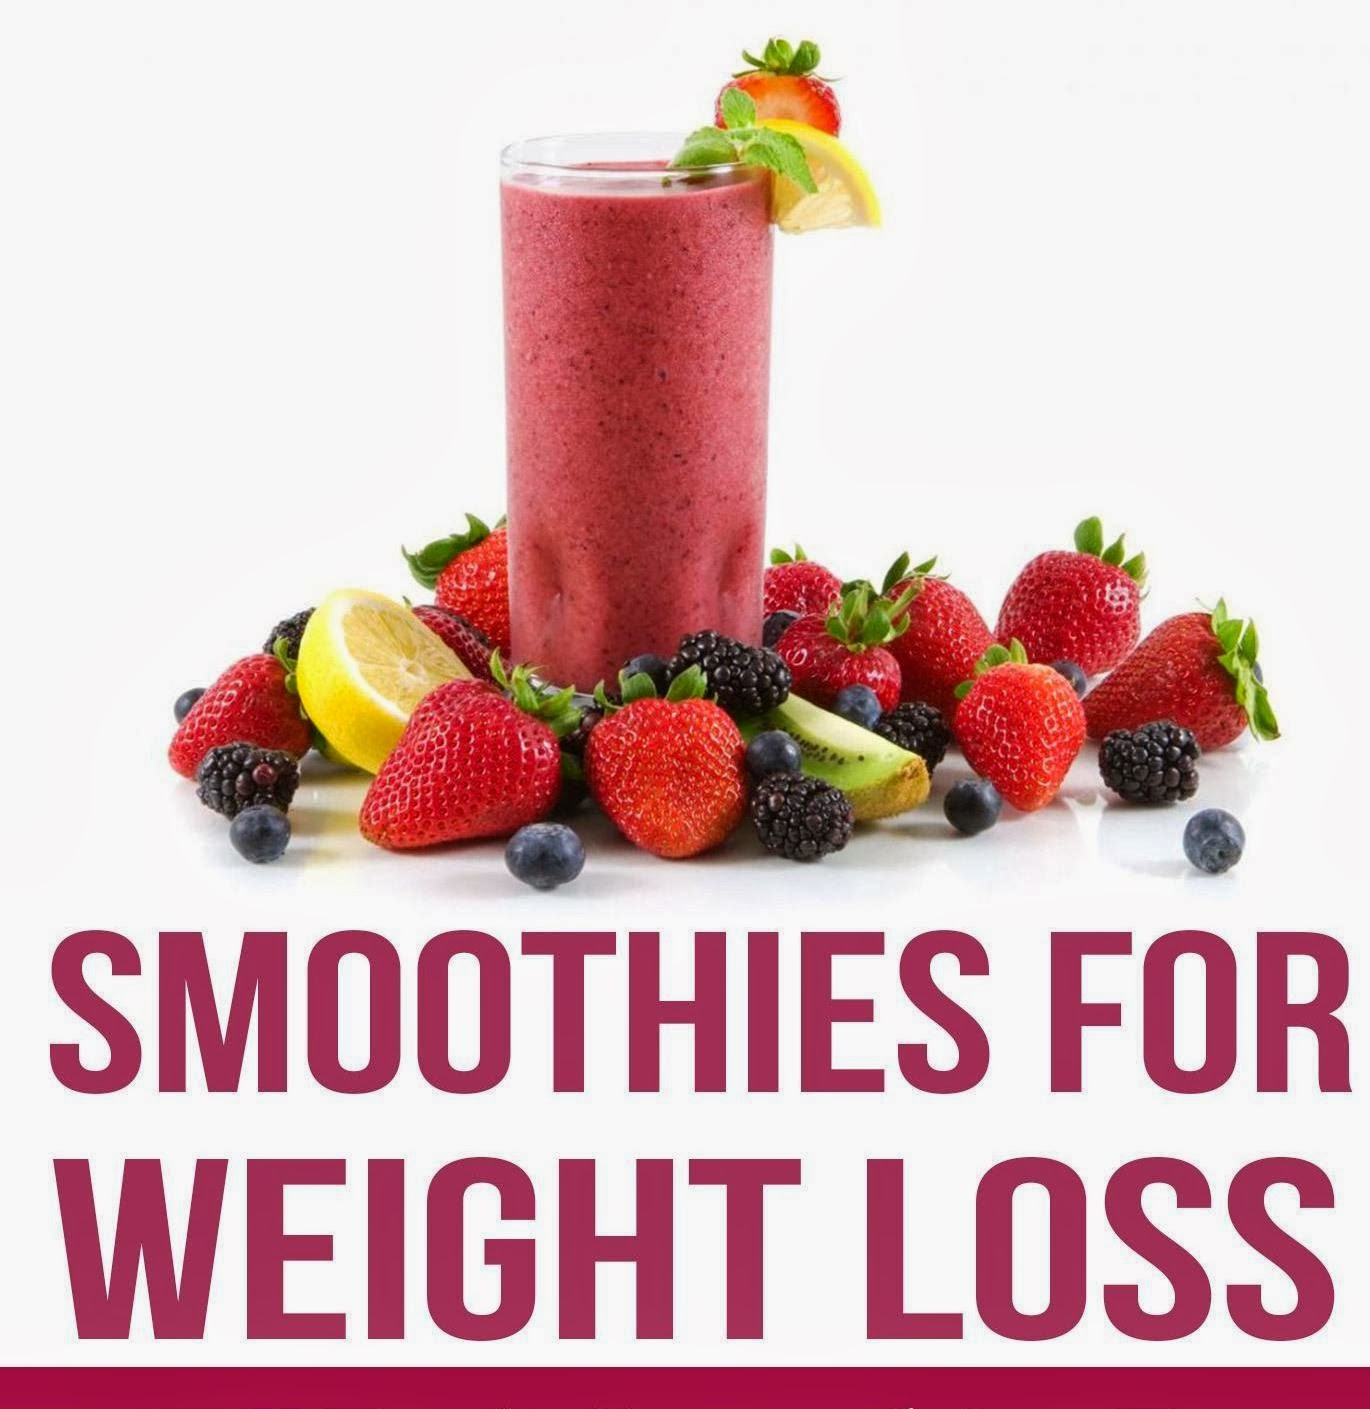 Fruit Smoothies For Weight Loss
 NATURAL FRUIT SMOOTHIES FOR WEIGHT LOSS Natural Fitness Tips